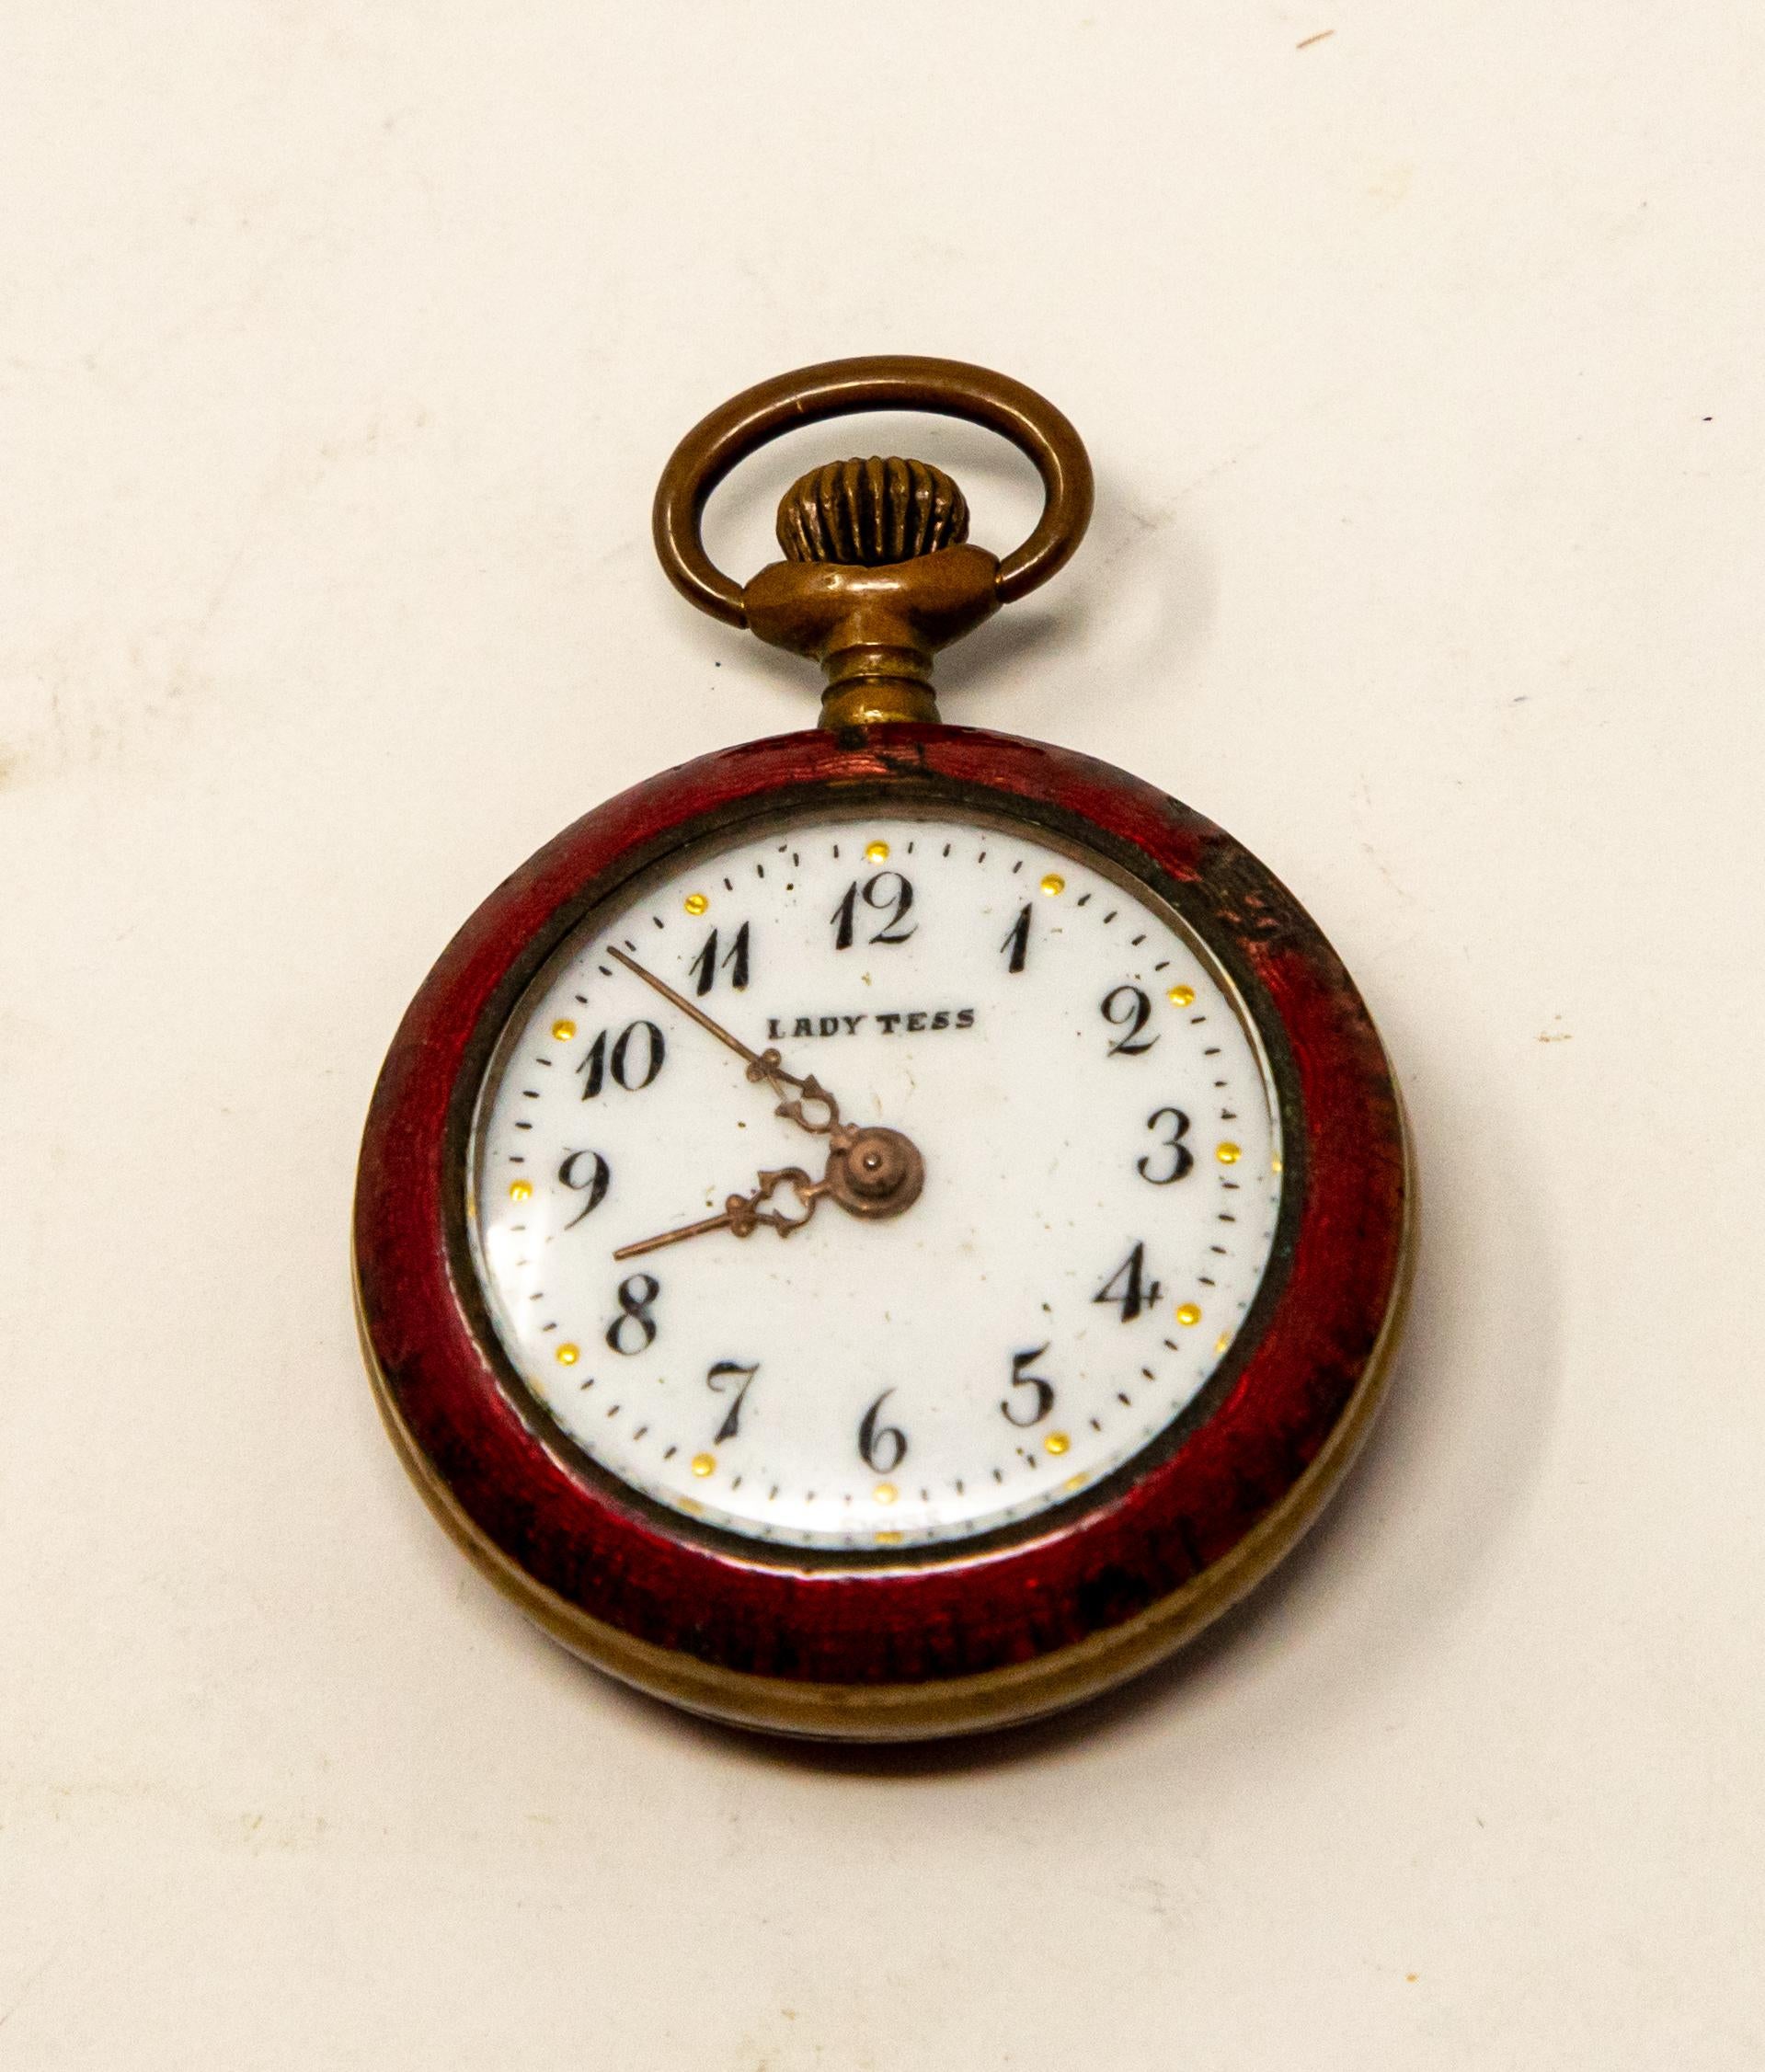 Lady Tess Ladies Pocket Watch In Fair Condition For Sale In Cookeville, TN